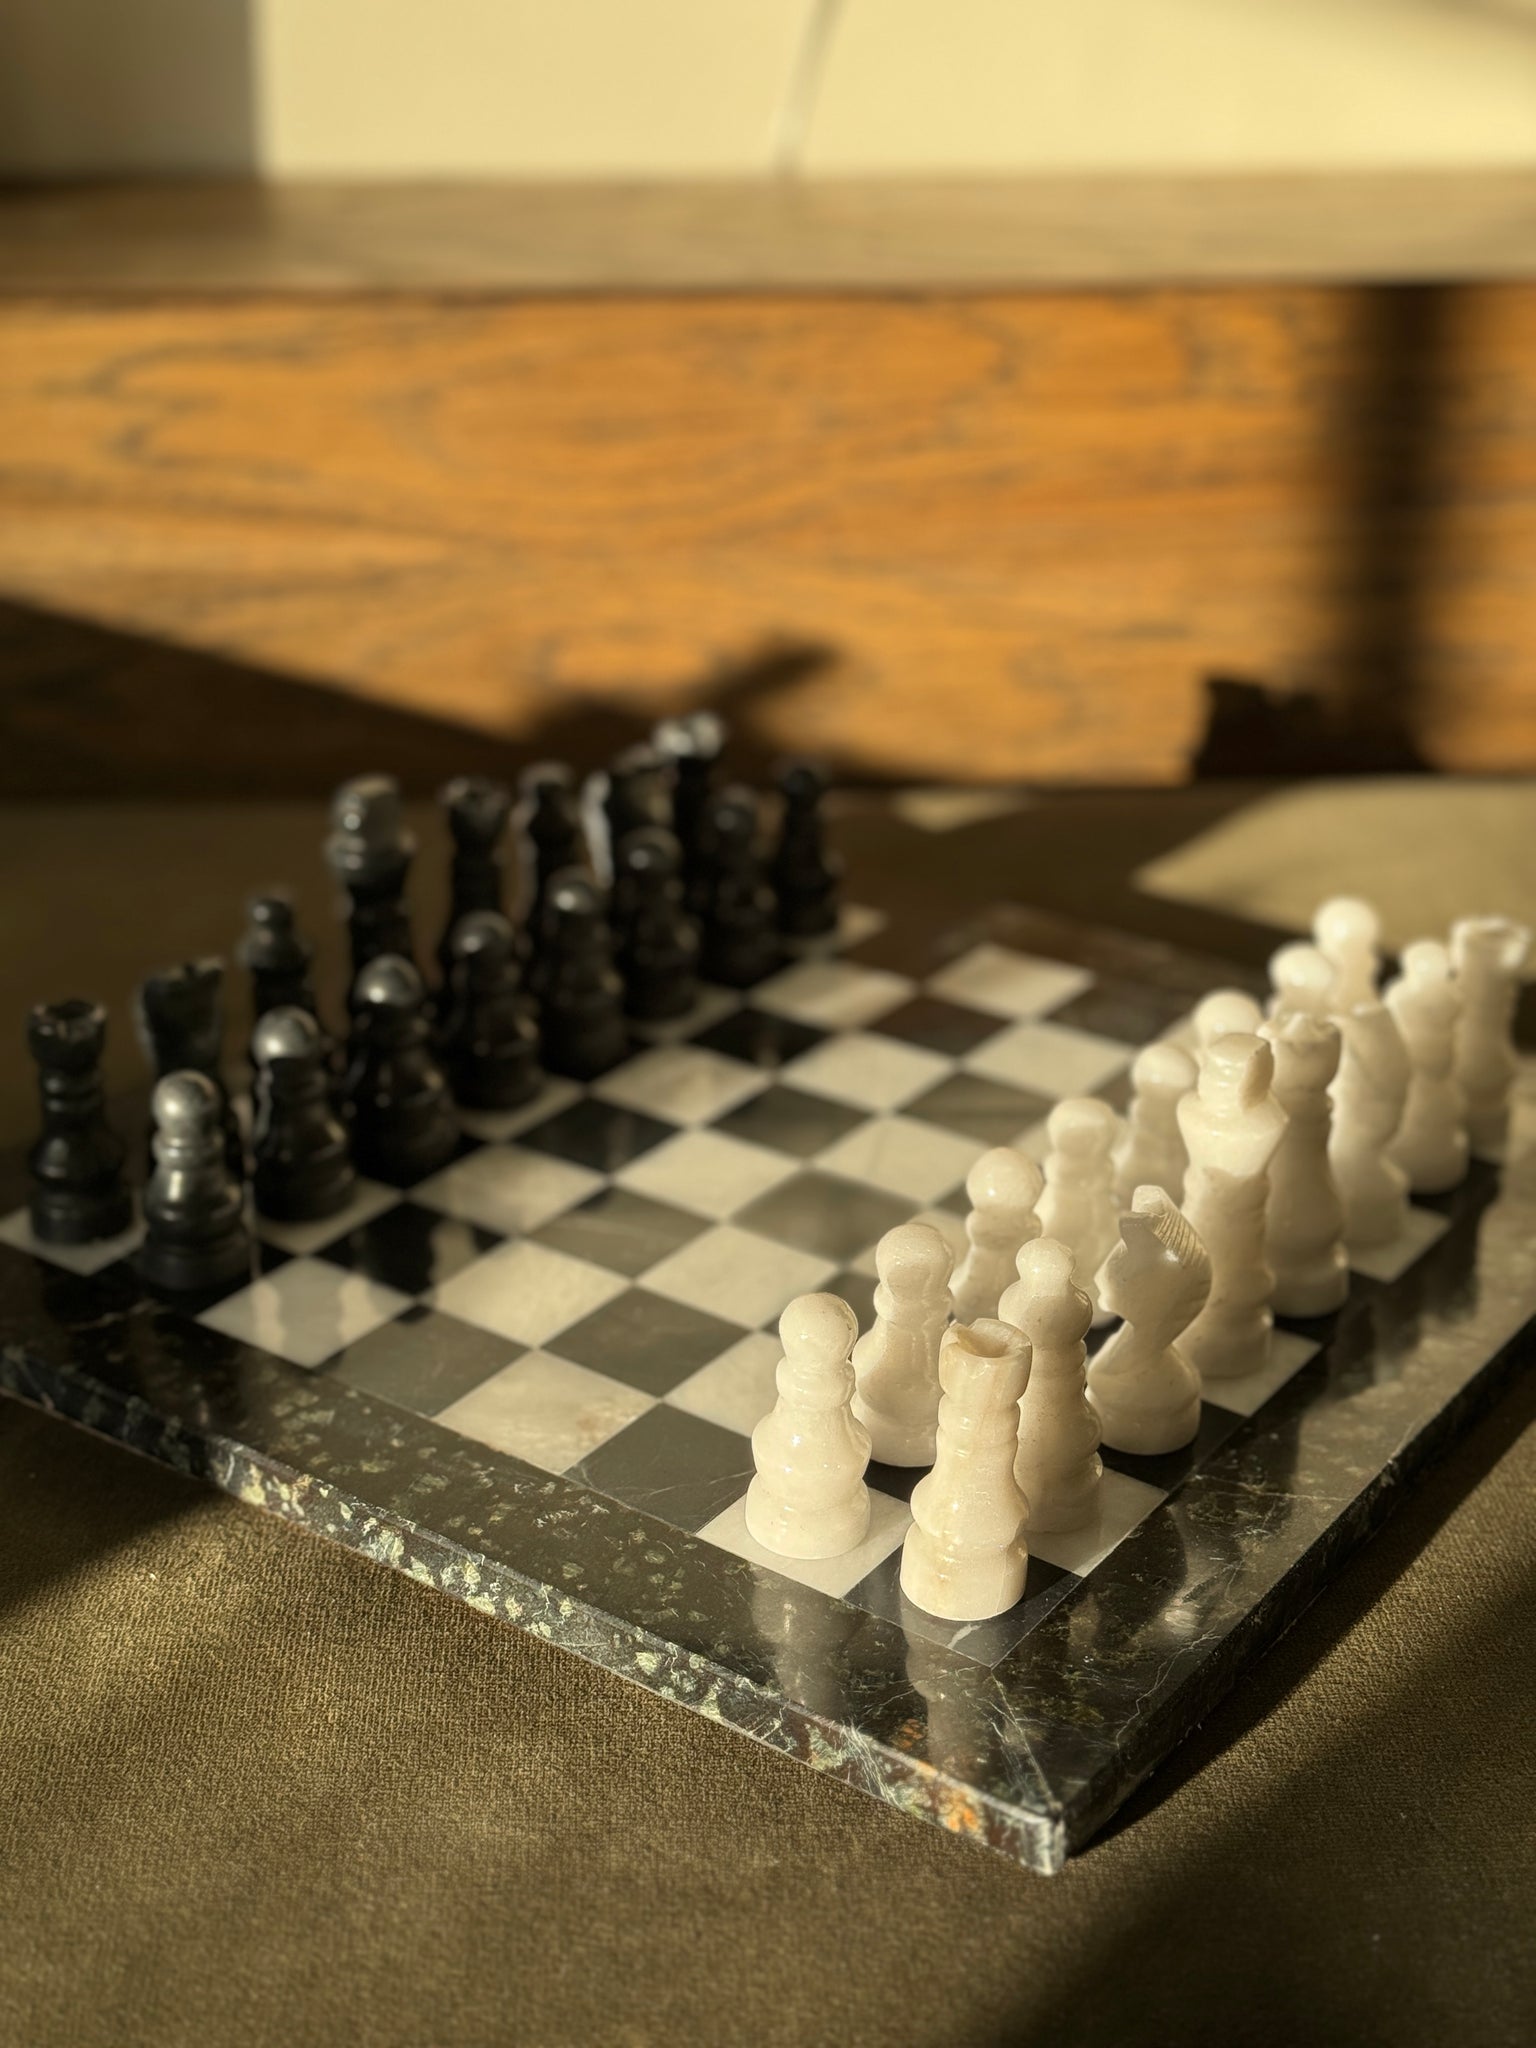 MARBLE & ONYX Chess Set - Monochrome with Dark Green Marble Border